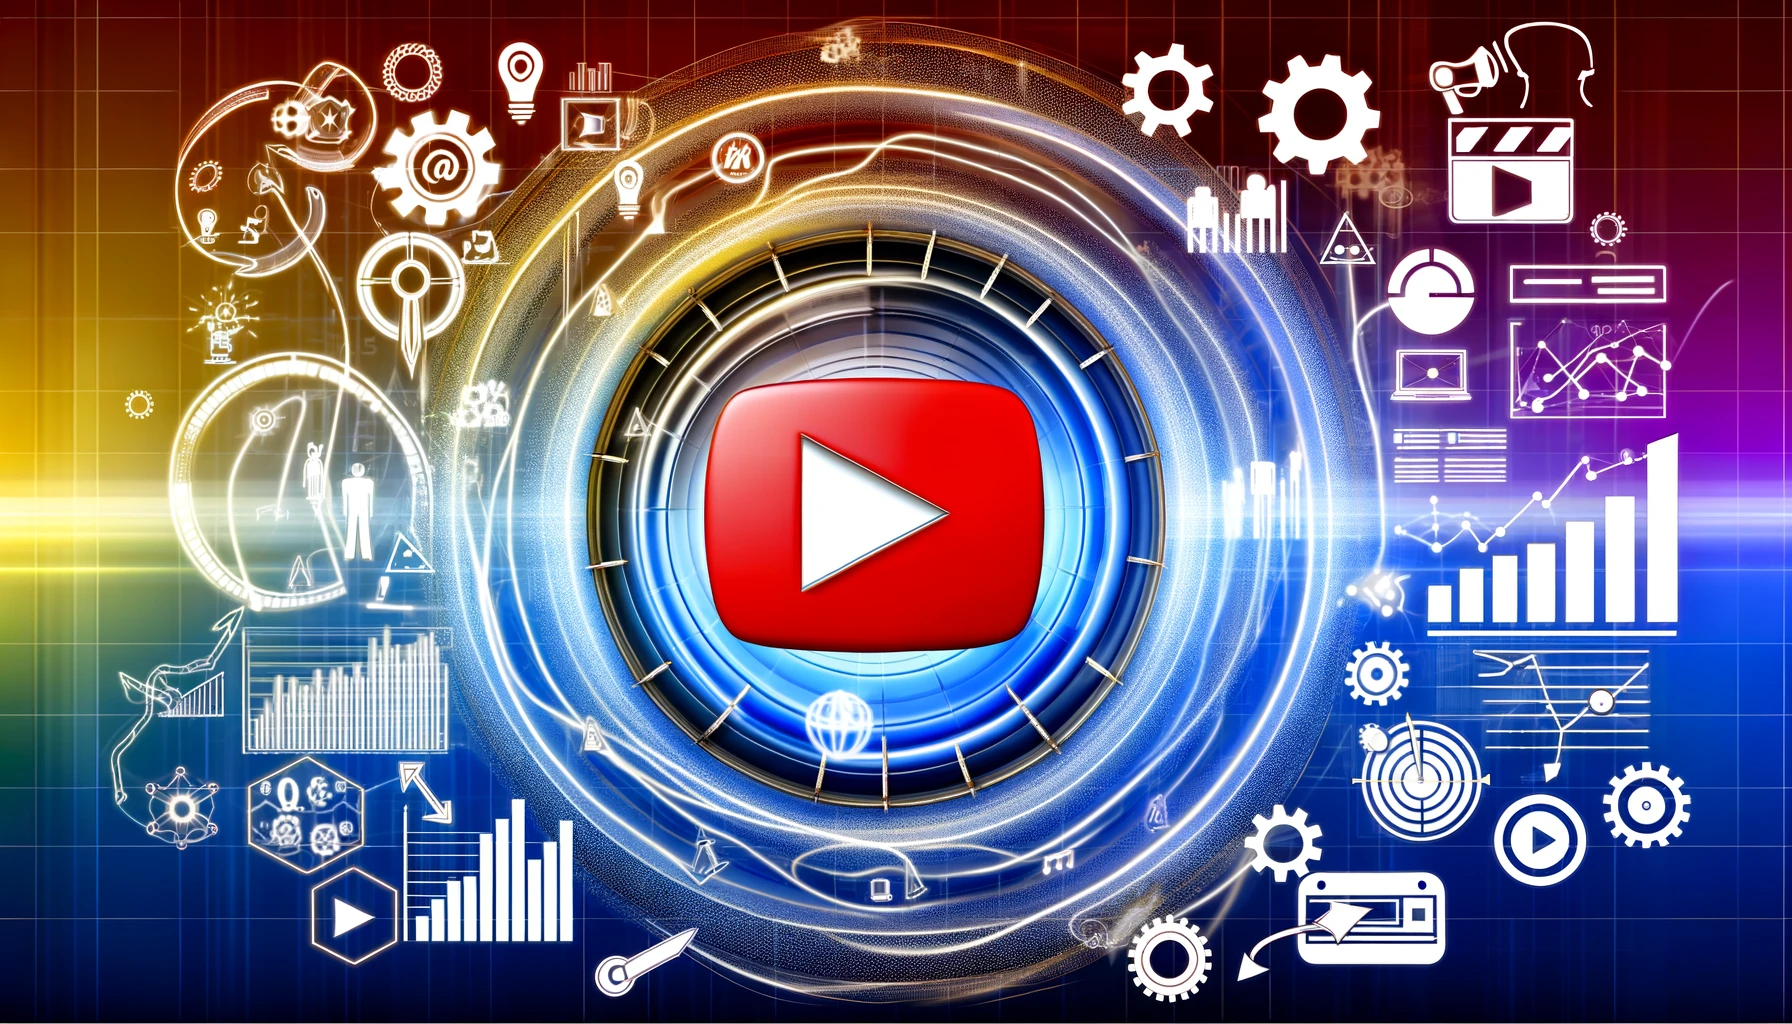 Central YouTube play button encircled by optimization elements like target audience icons and performance graphs, illustrating Youtube Ad Optimization strategies.